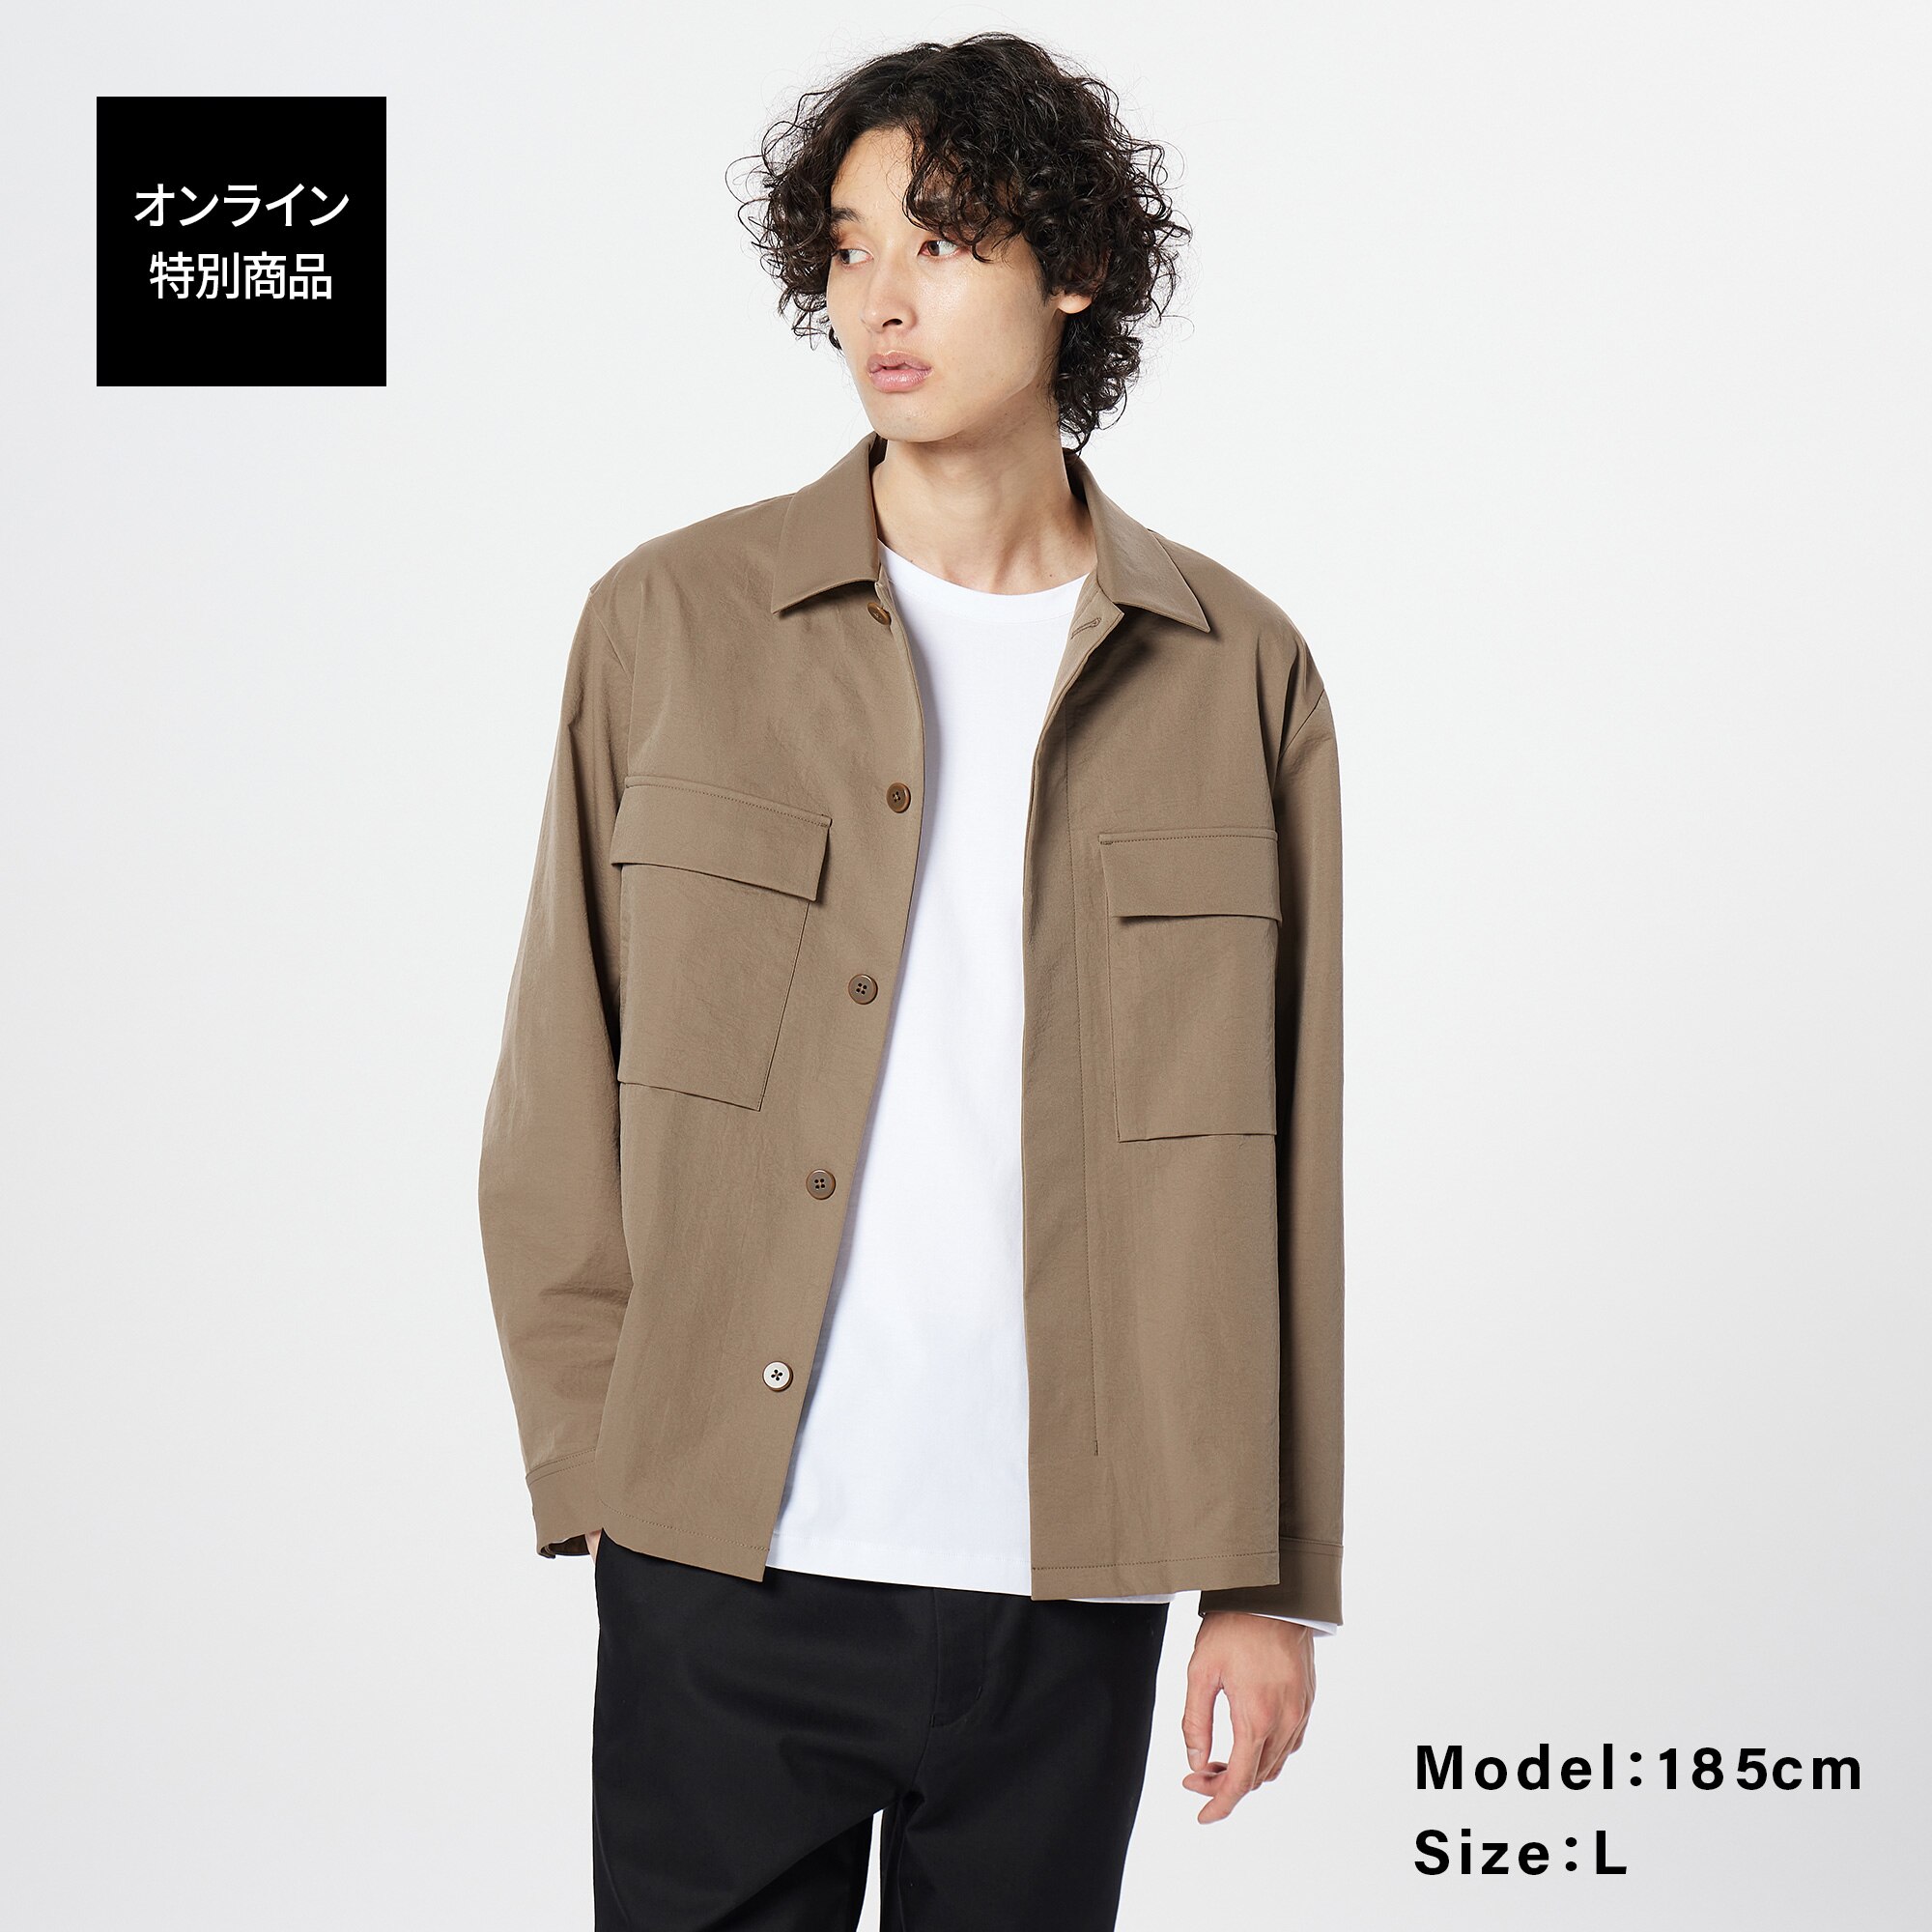 Theory 20aw DRY JERSEY セットアップ カーキ